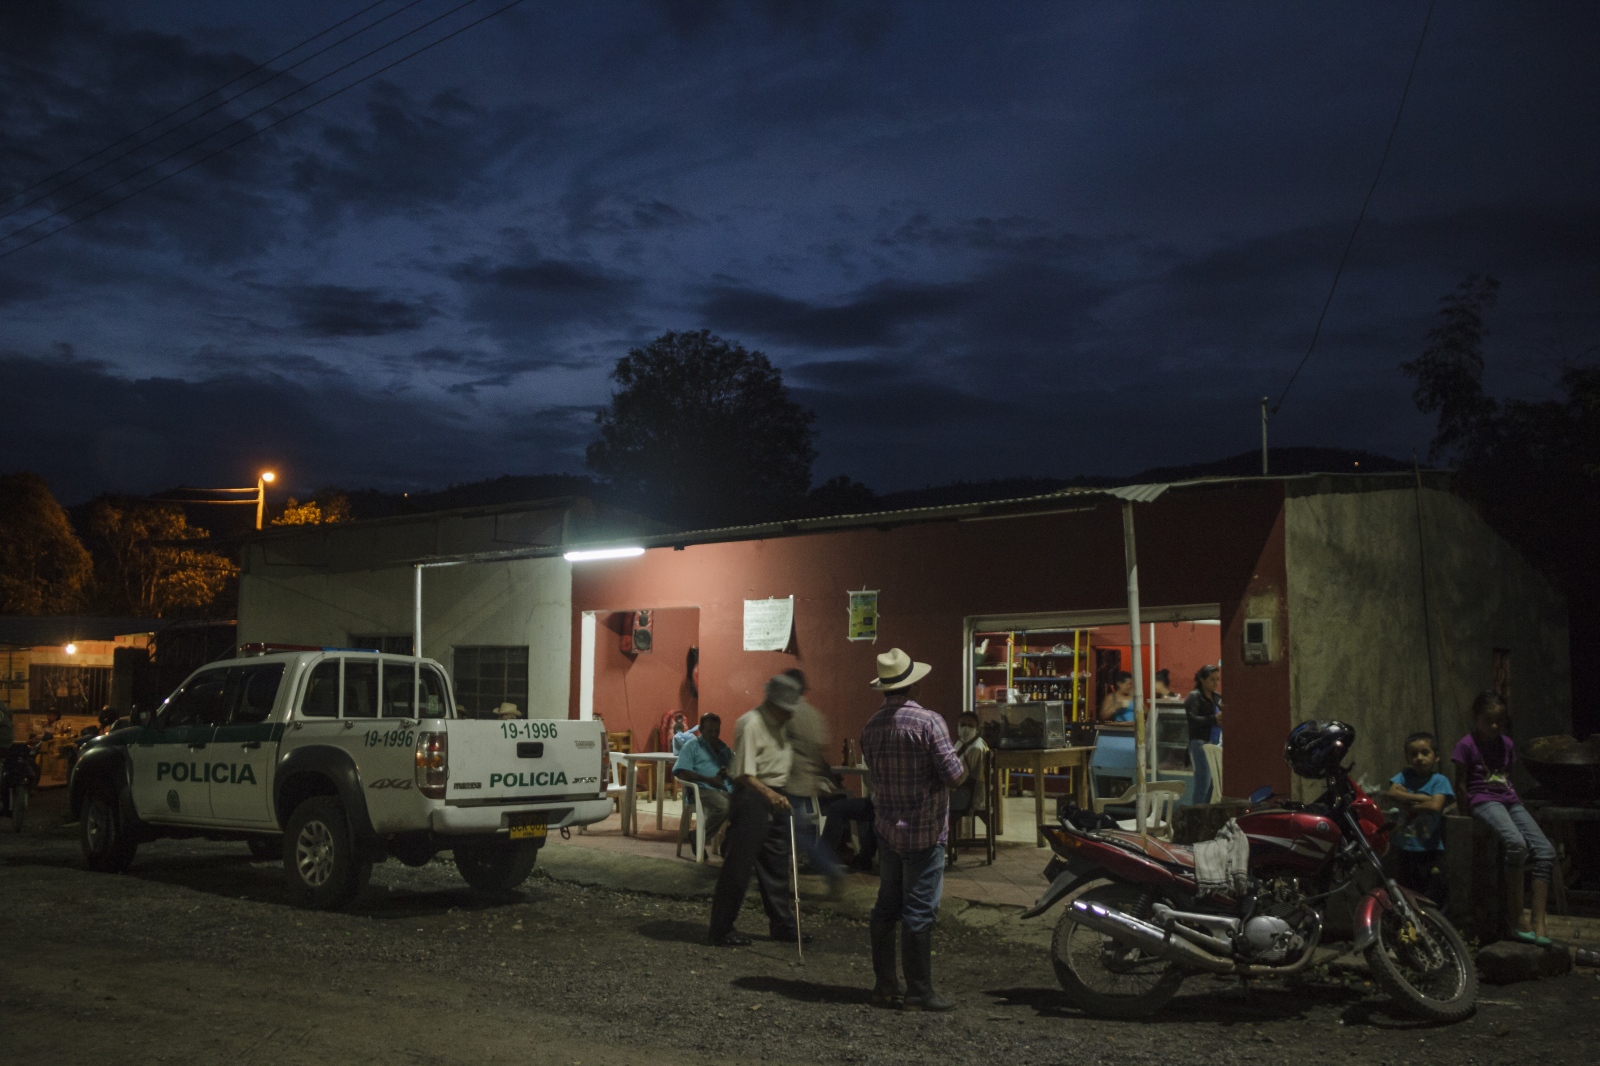 Home Sweet Gold - El Cruce is 10 km away from La Virgen, it is where every...